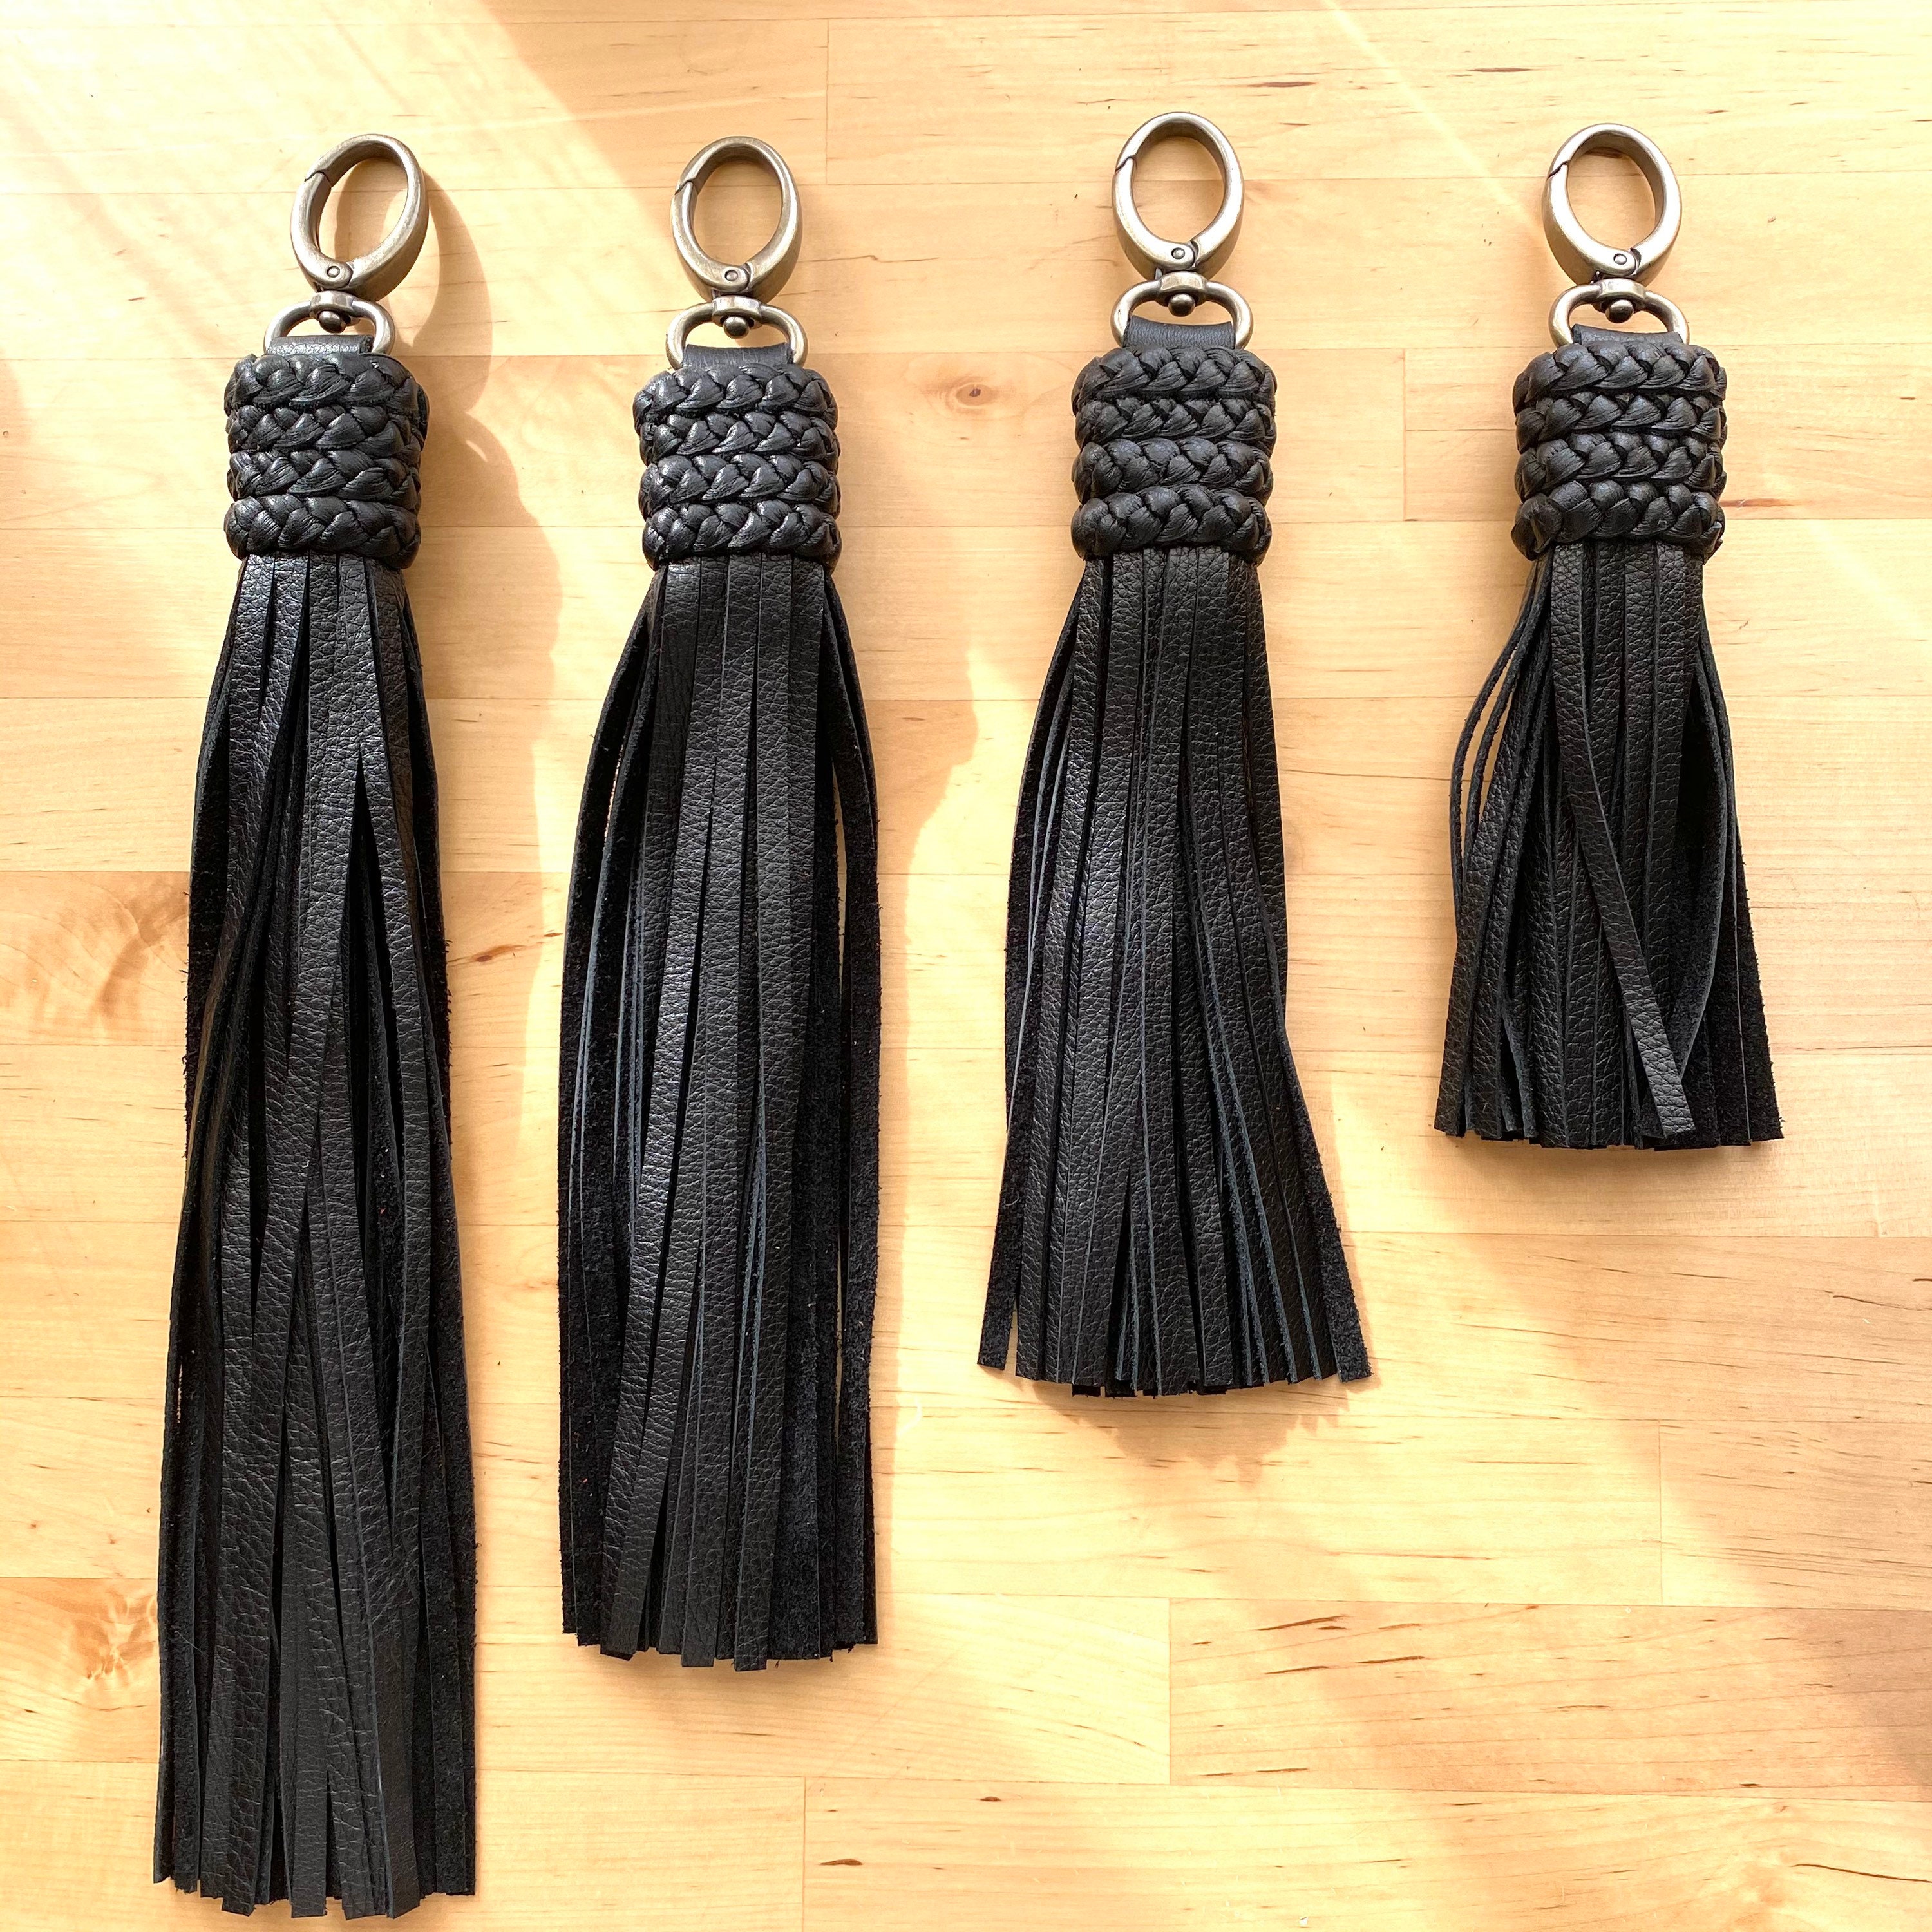 Keychain Tassels Leather Tassel Pendants with Silver White Caps,Tassel  Charm for Jewelry Making Keychain Bracelets Ring Crafts -30pcs(1-1/2  inch,Blue)